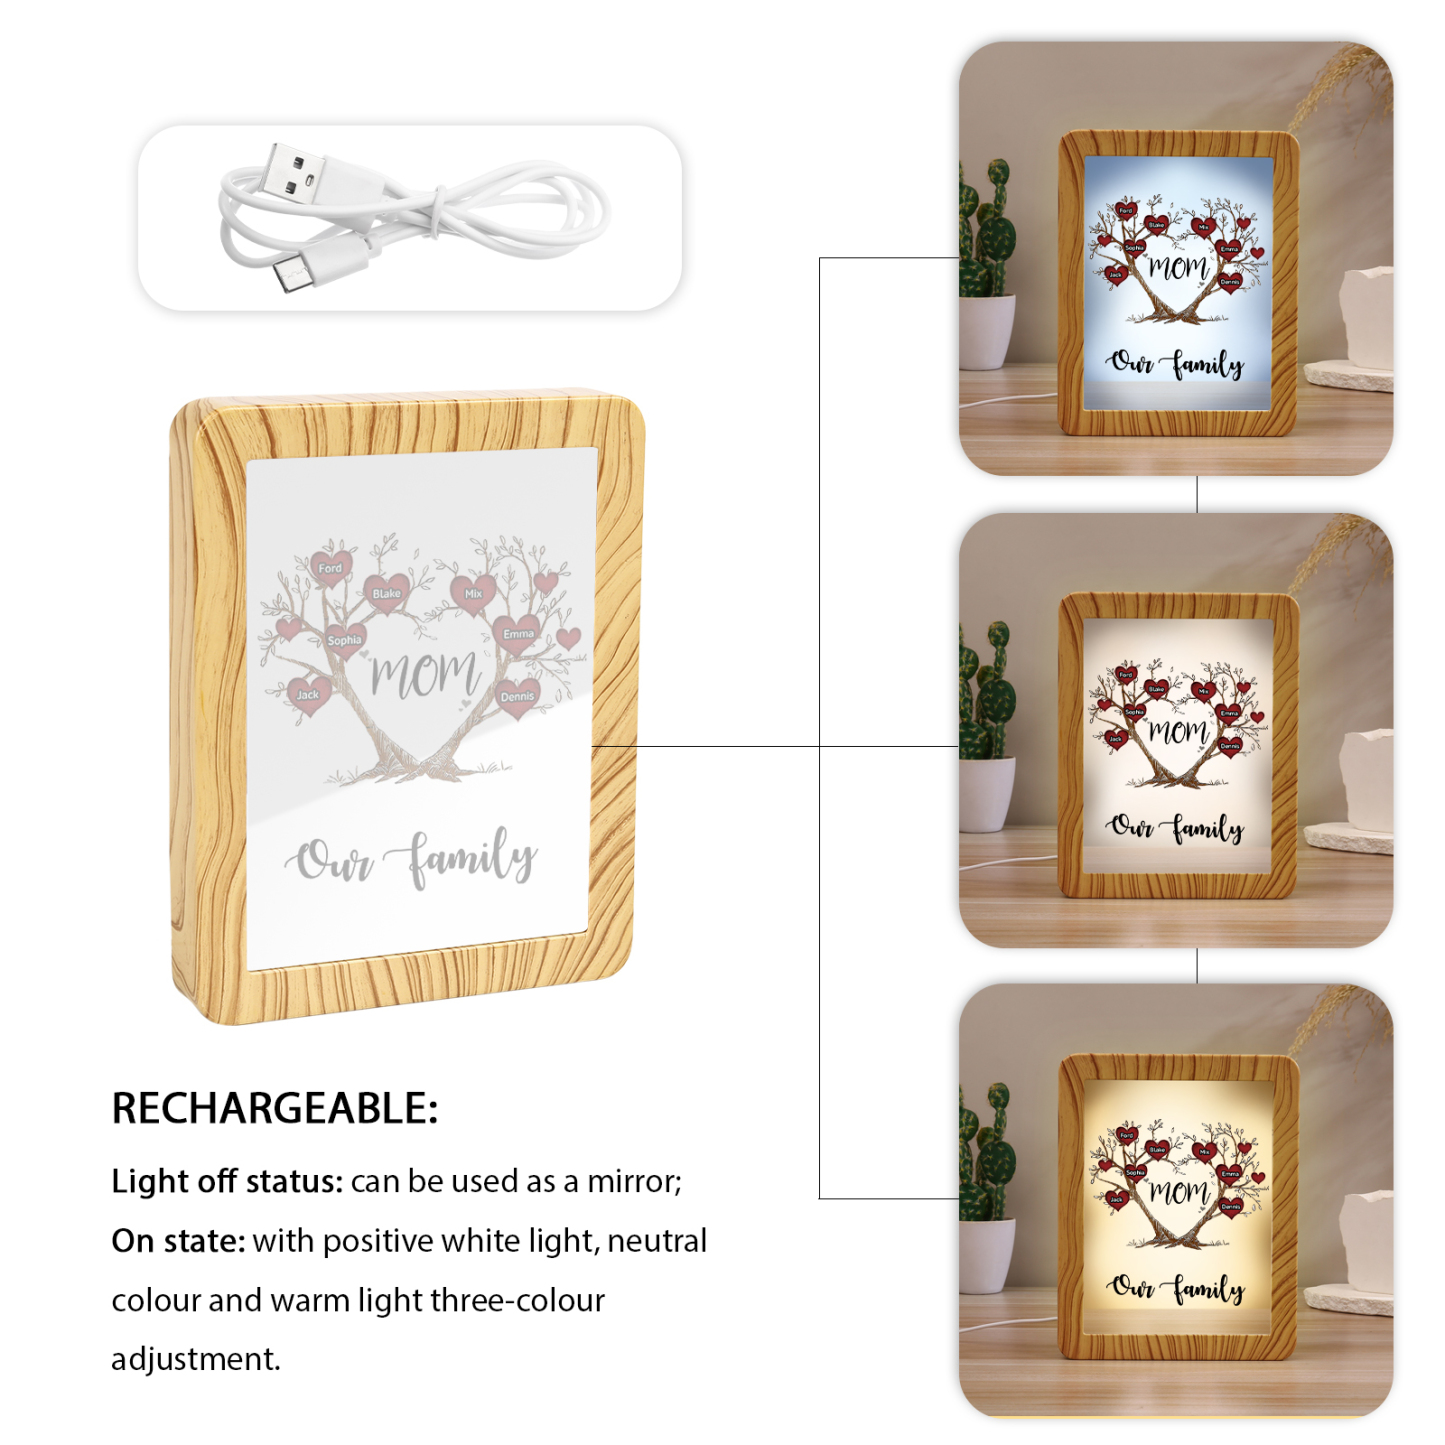 7 Names - Personalized Home Mirror Photo Frame Night Light Insert/Rechargeable Custom Text LED Night Light Gift for Mom